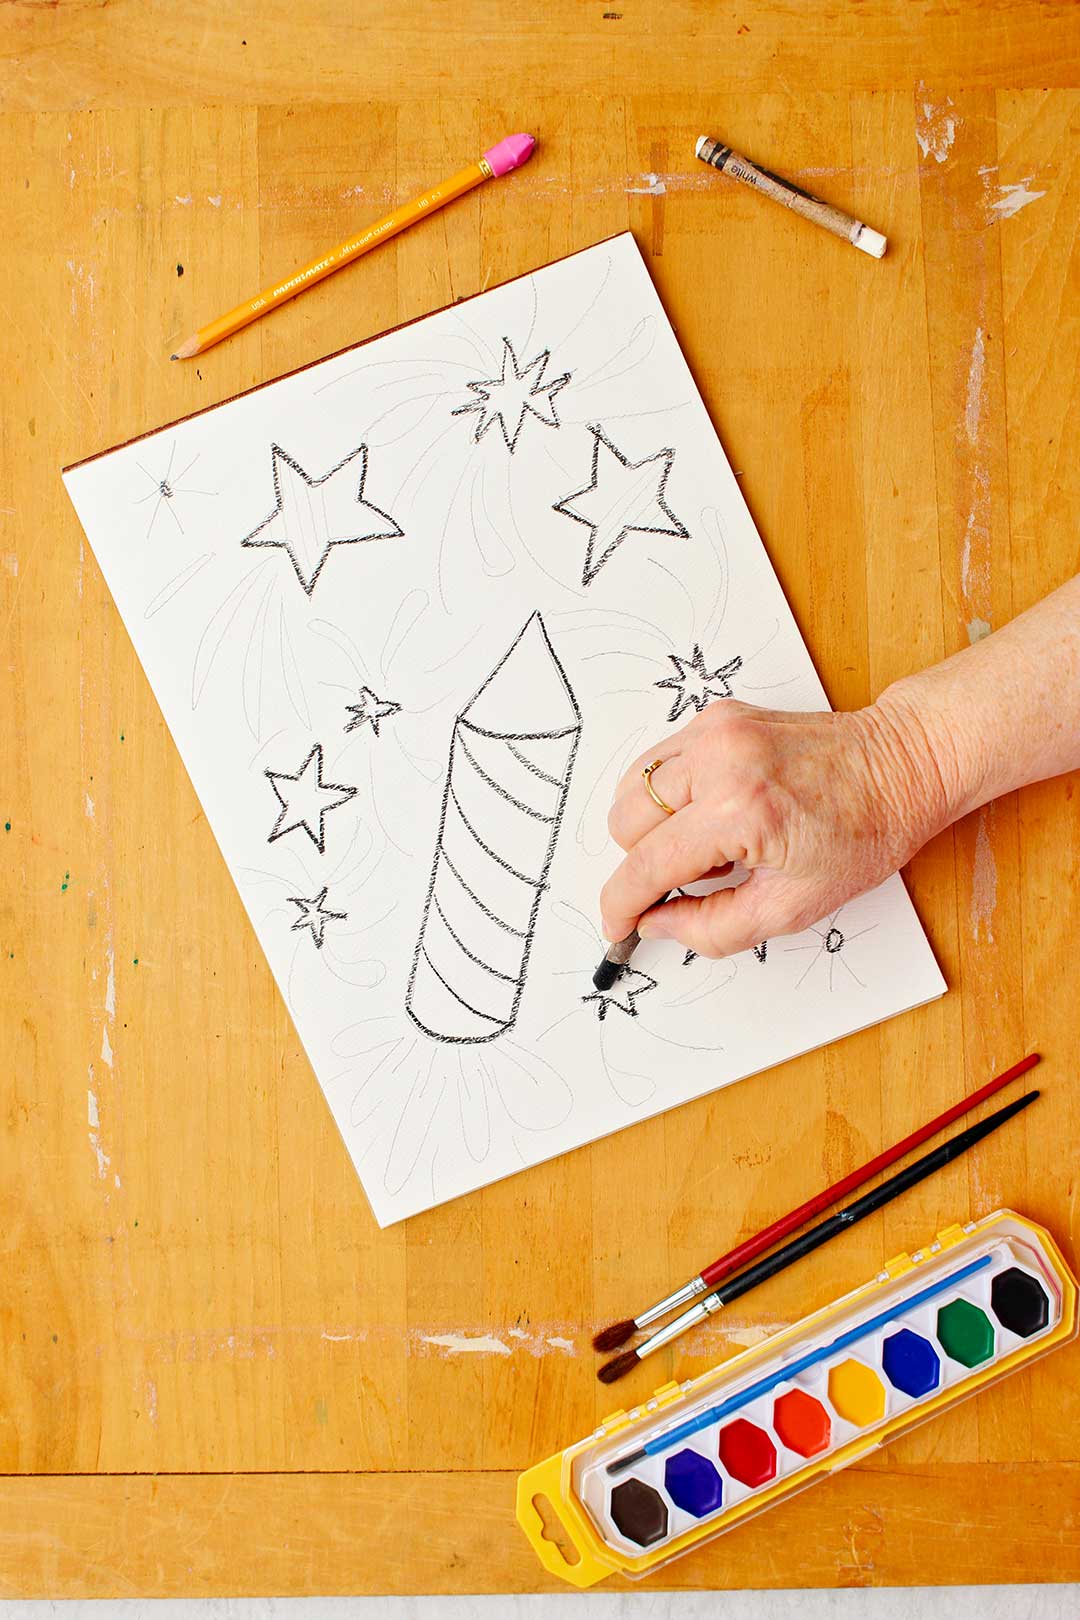 Hand drawing stars with black crayon on paper.